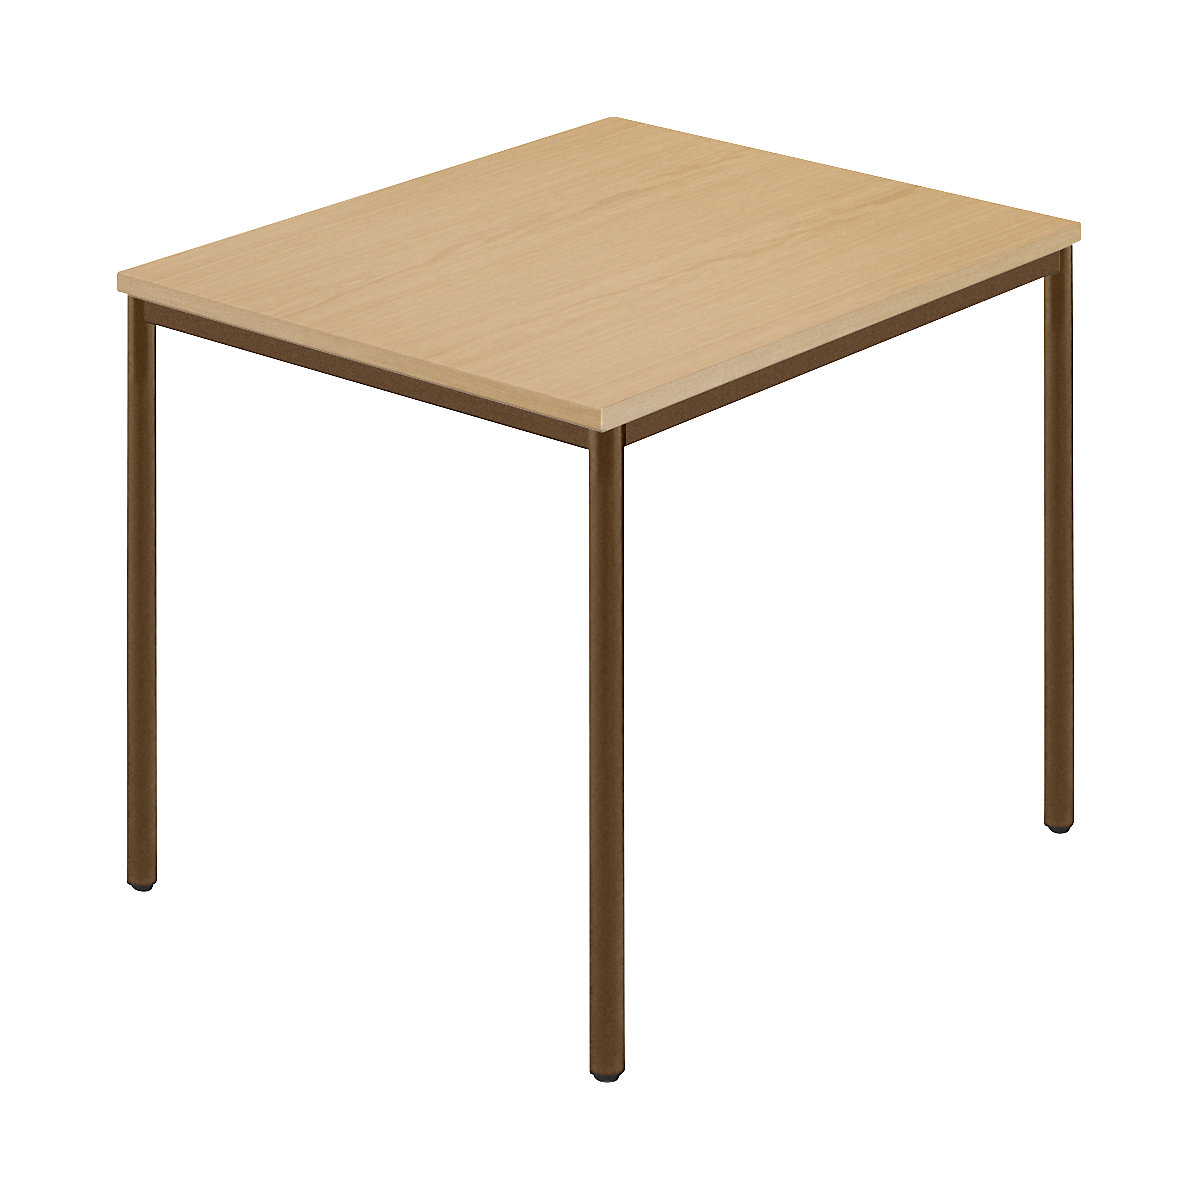 Rectangular table, coated round tubing, WxD 800 x 800 mm, beech natural / brown-5